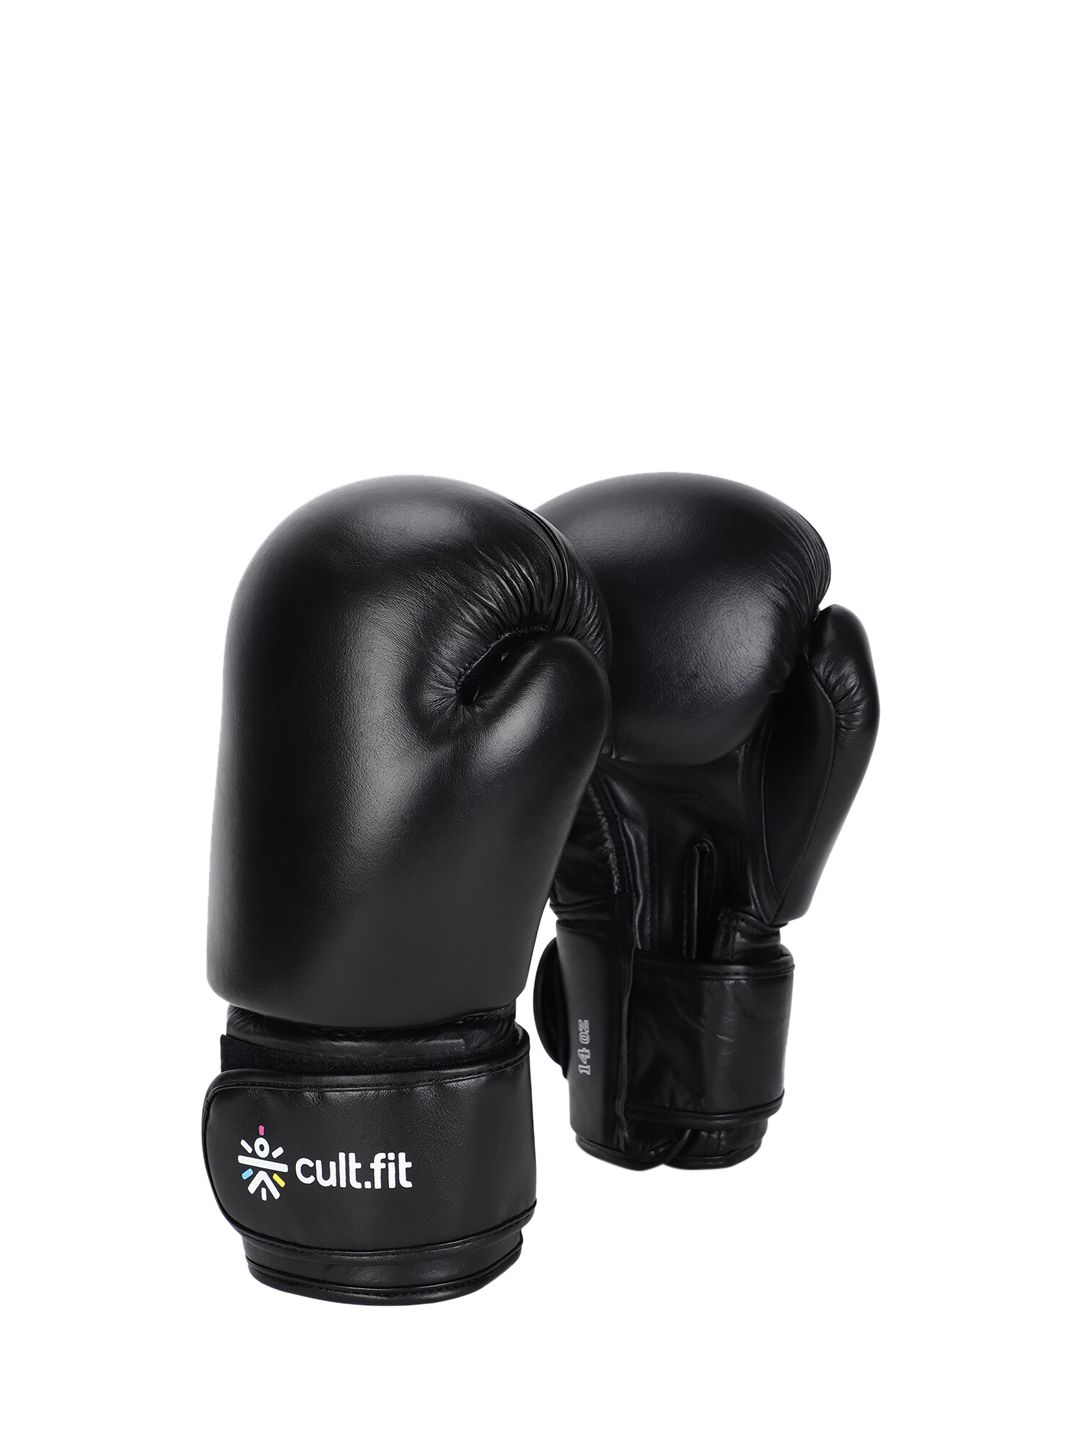 Cultsport Black Solid Boxing Leather Gloves Price in India